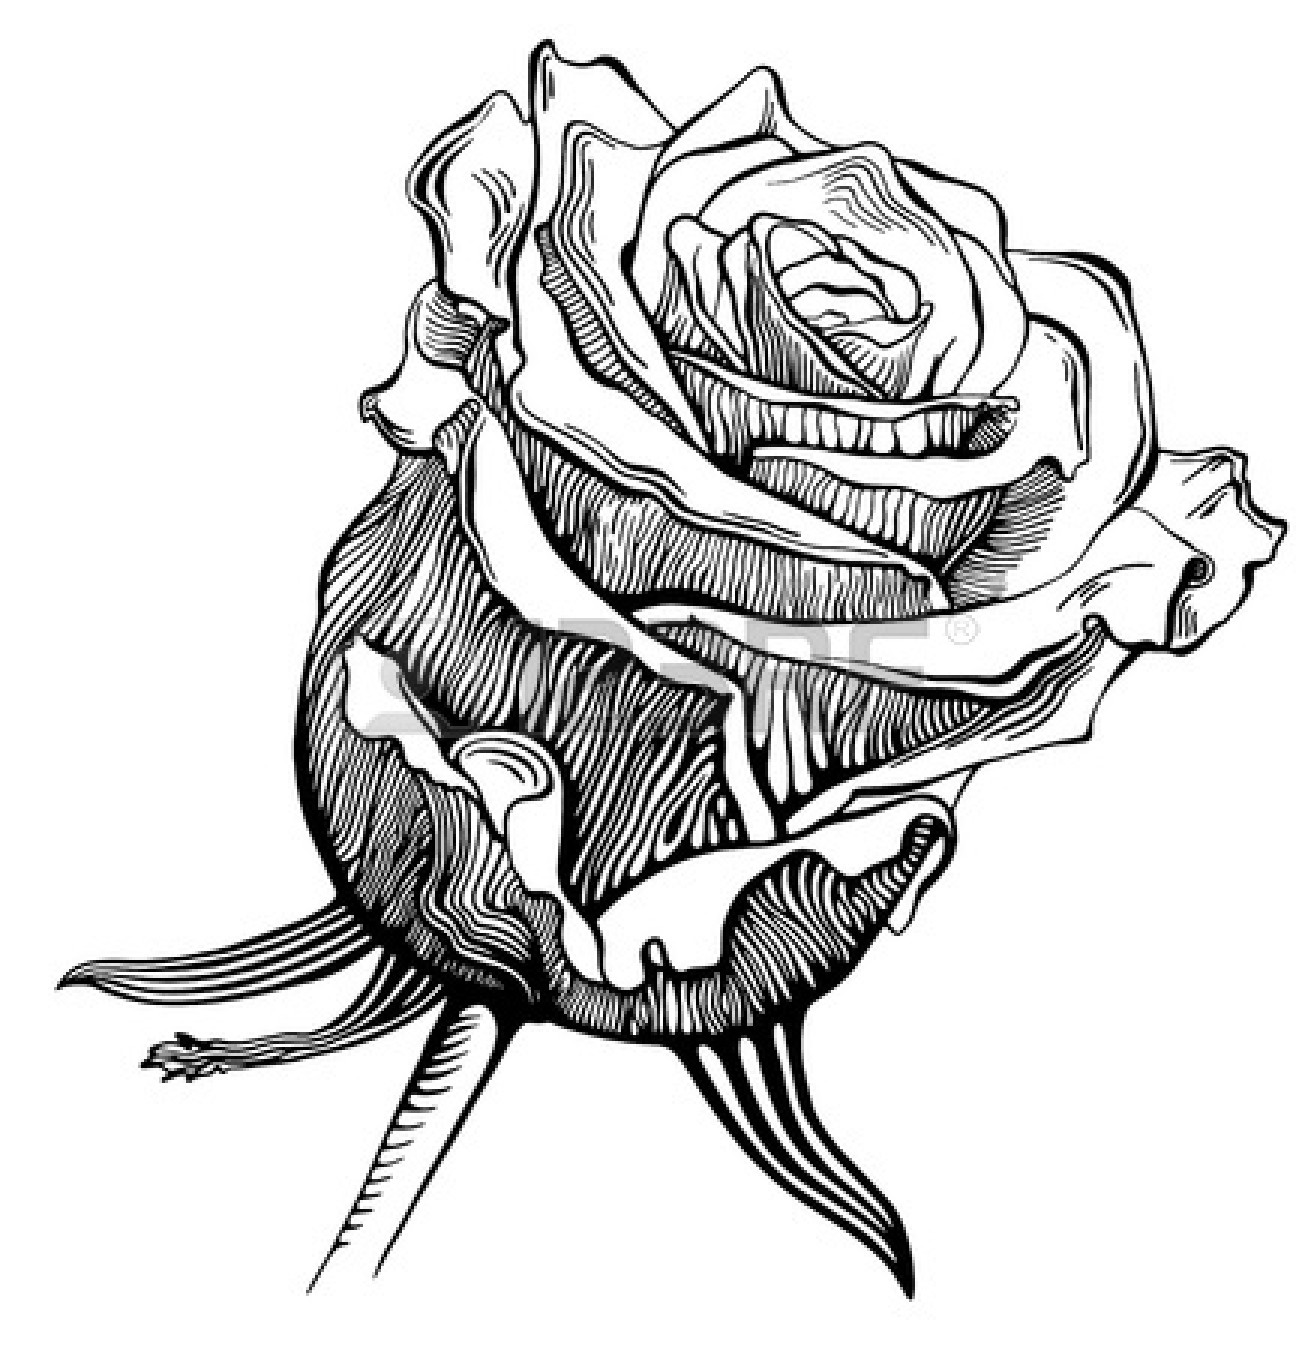 Rose Black And White Drawing Widescreen 2 Hd Wallpapers - Black And White Drawing - HD Wallpaper 